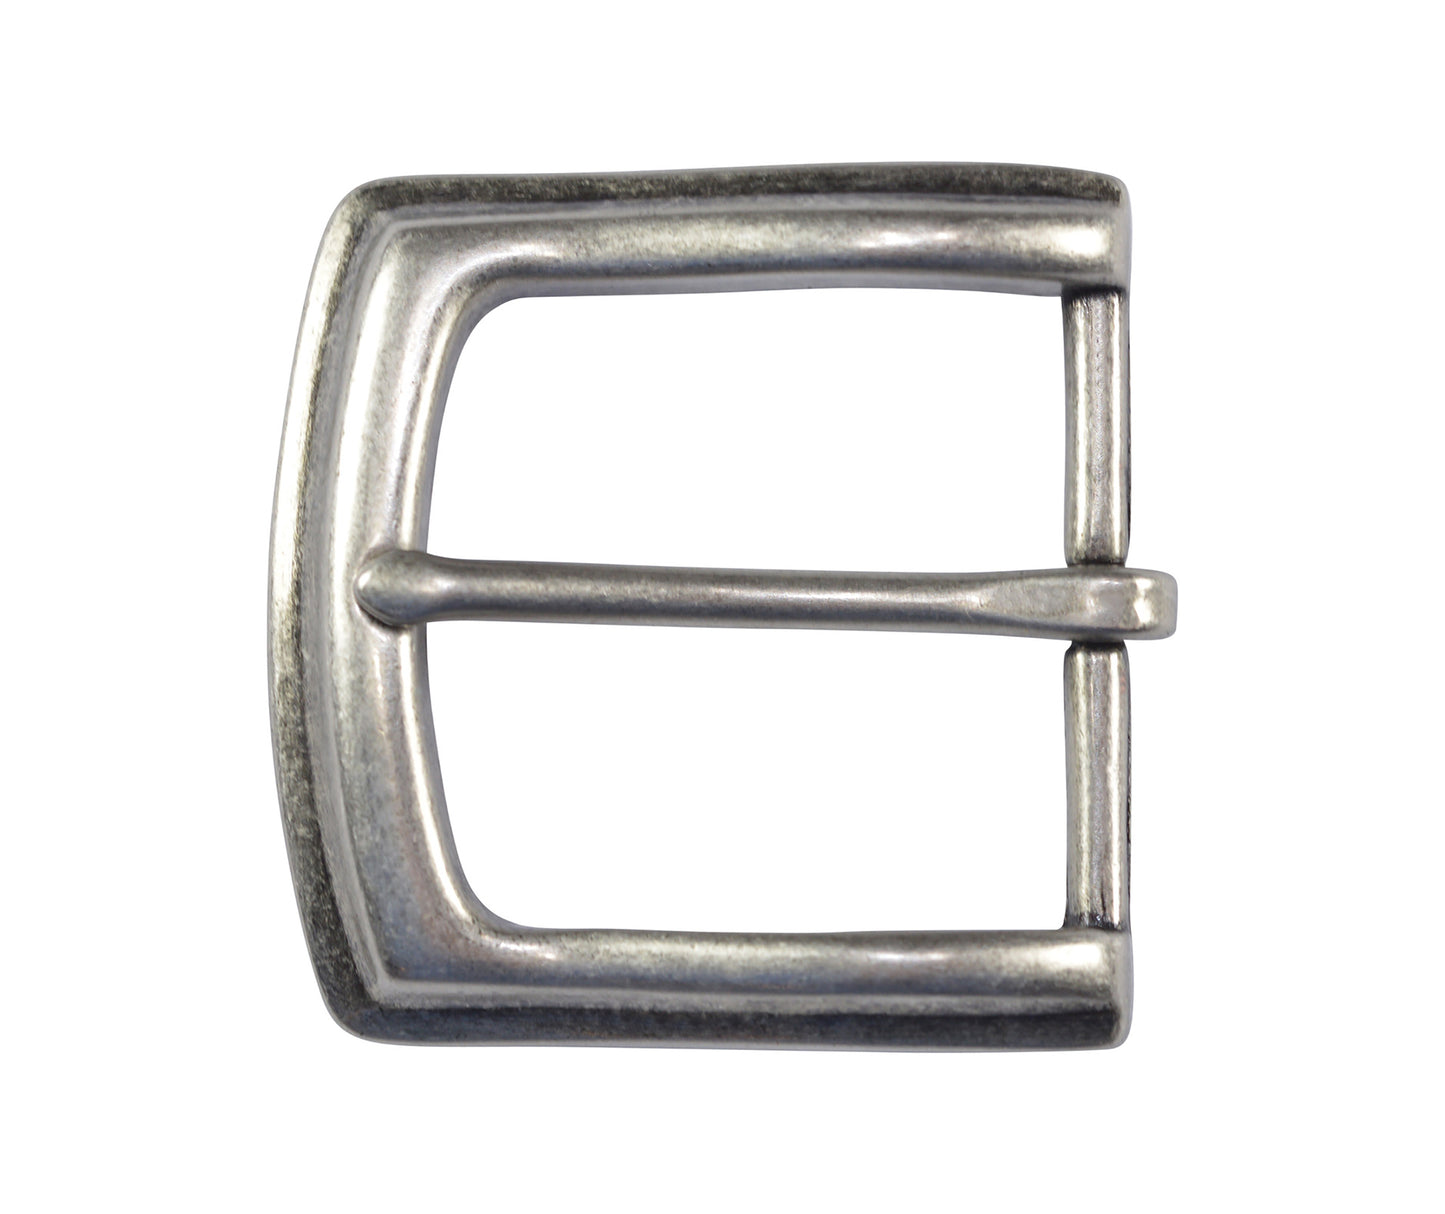 TBS-P3926S - Silver Finish Pin Buckle for 1.5" or 38mm Belts